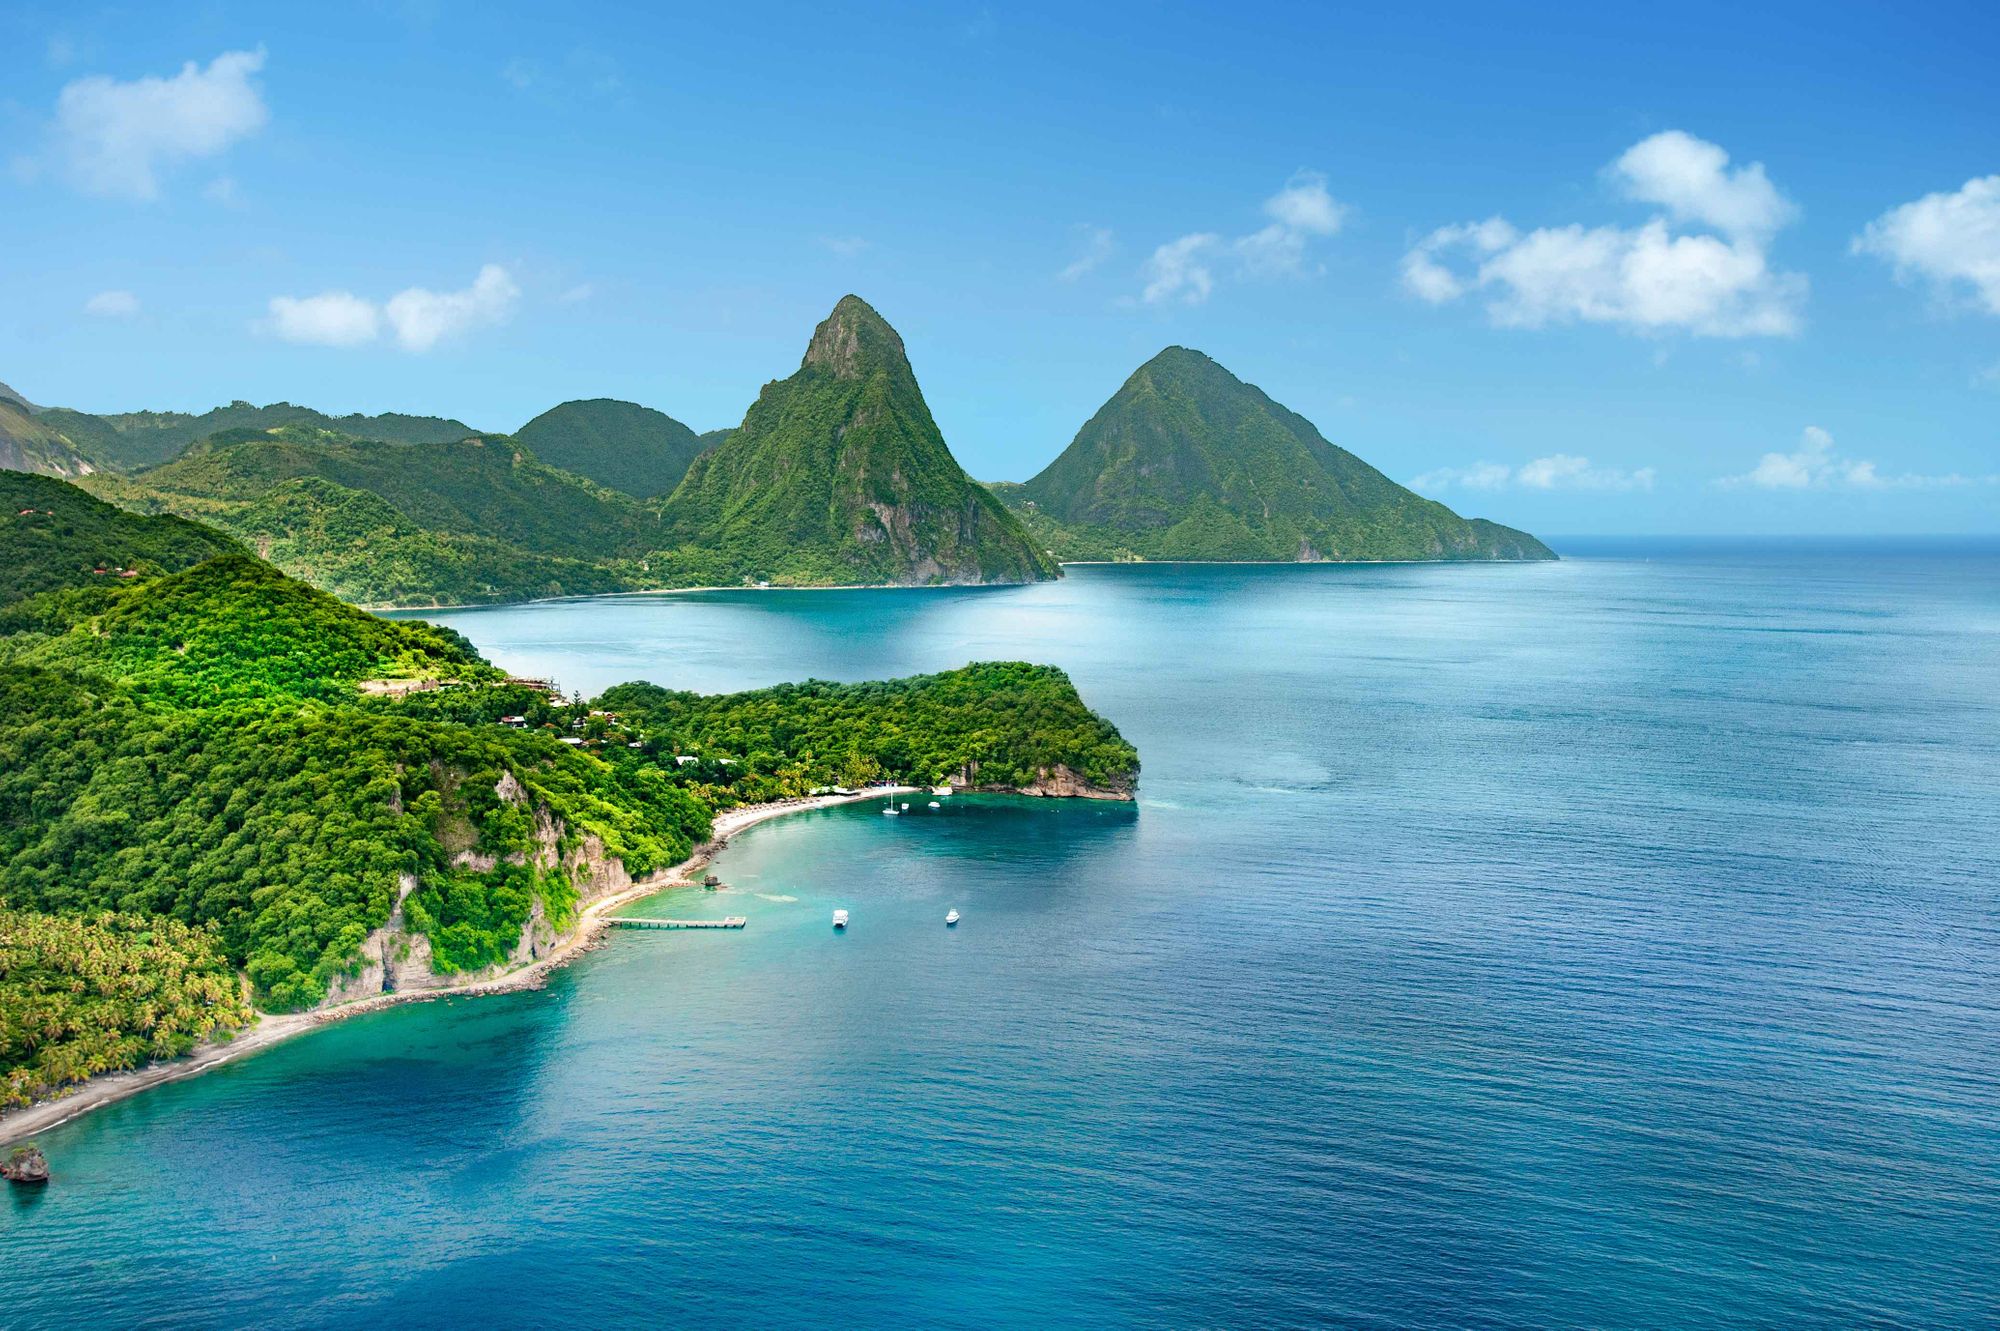 Scuba Diving In Saint Lucia: What To Expect